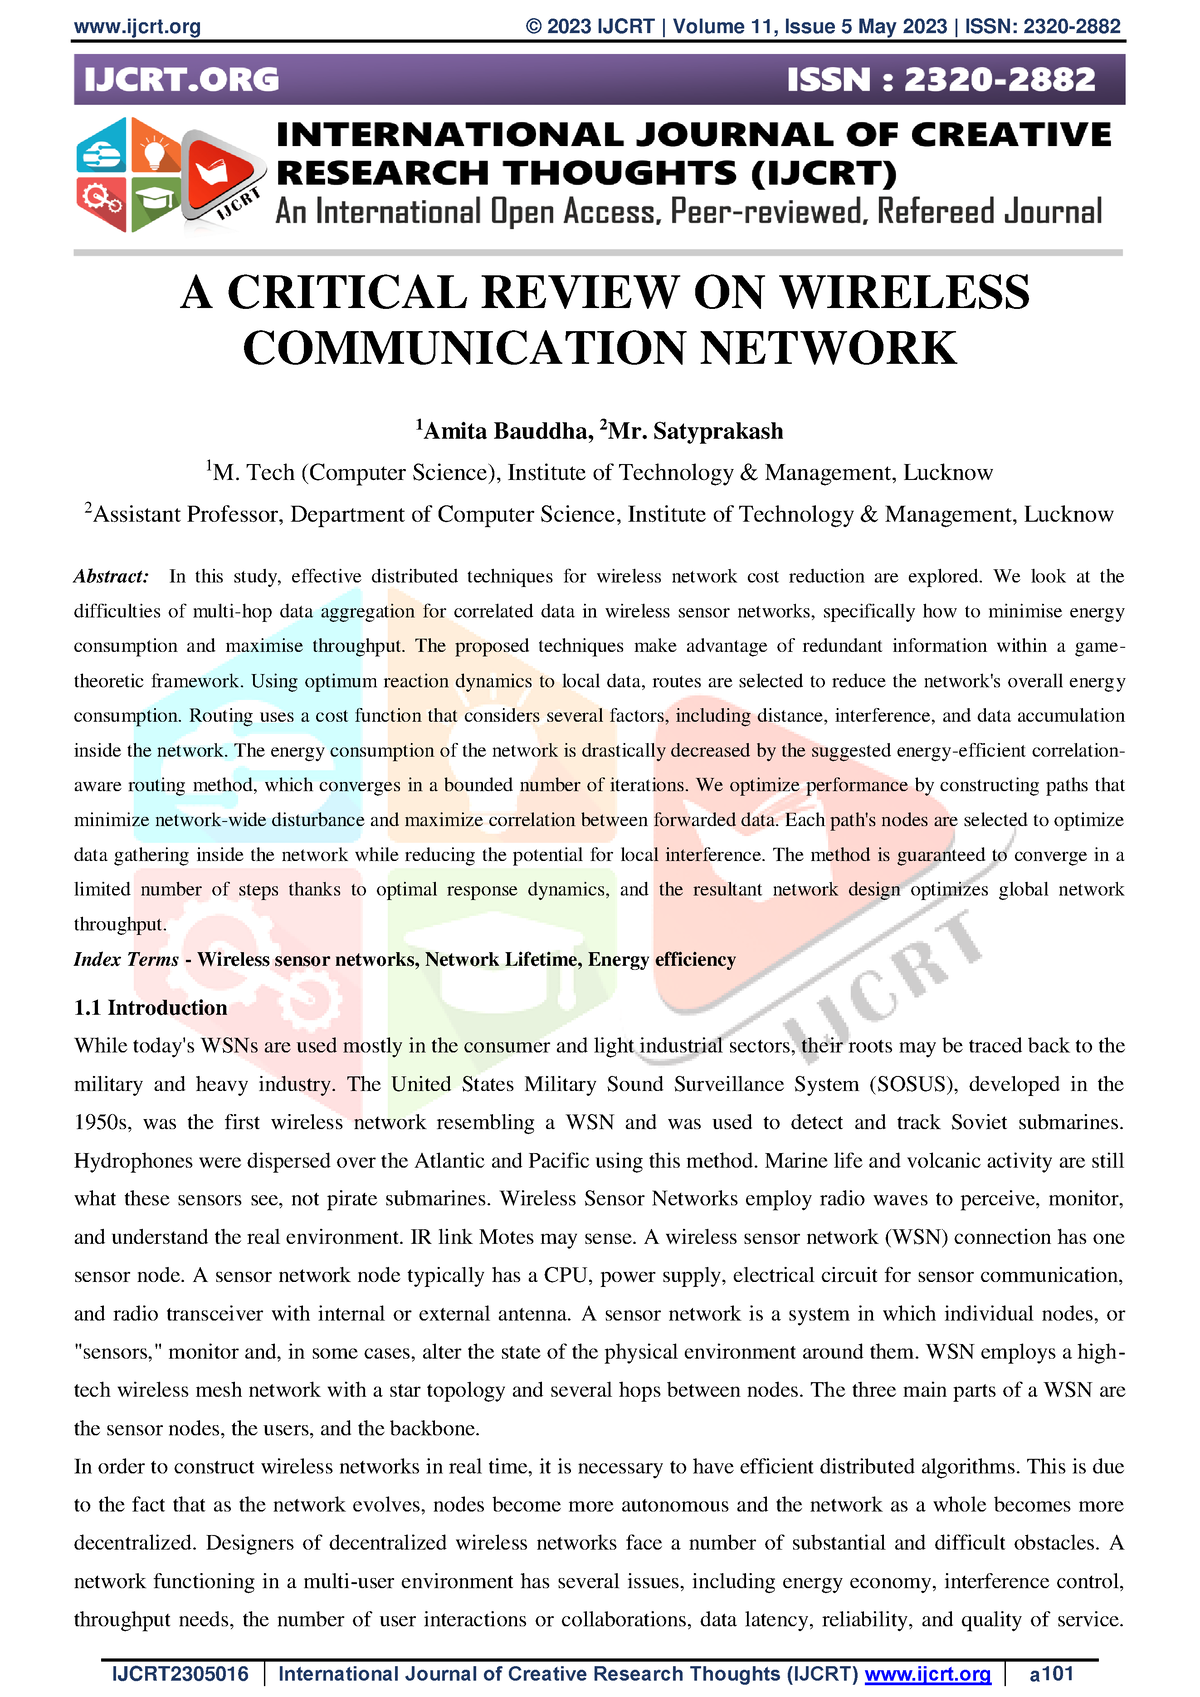 research articles on wireless communication